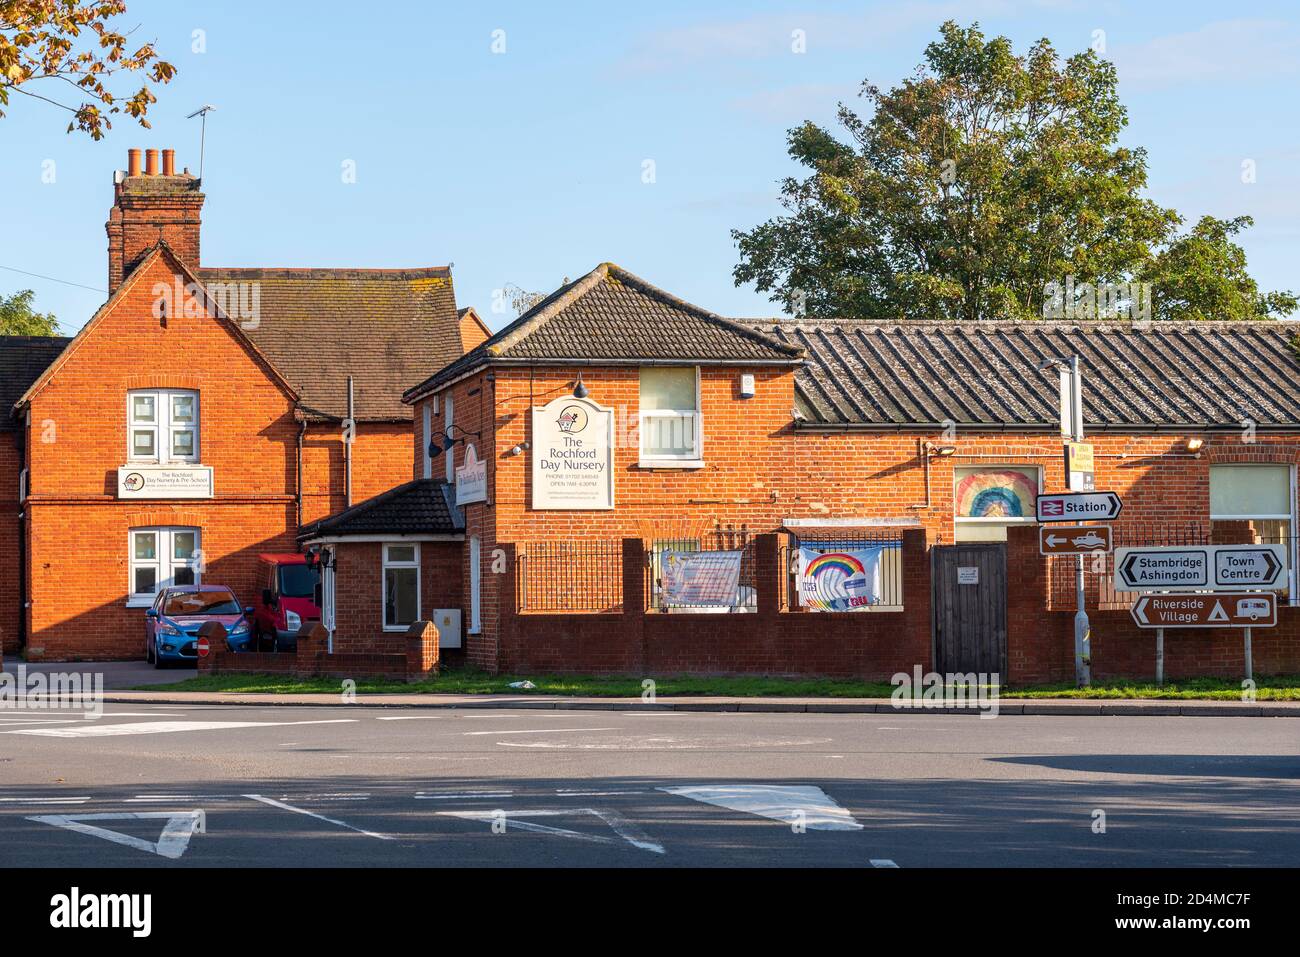 The Rochford Day Nursery, in Rochford, Southend, Essex, UK. During COVID-19 pandemic, with rainbow banner. Local traffic signs Stock Photo